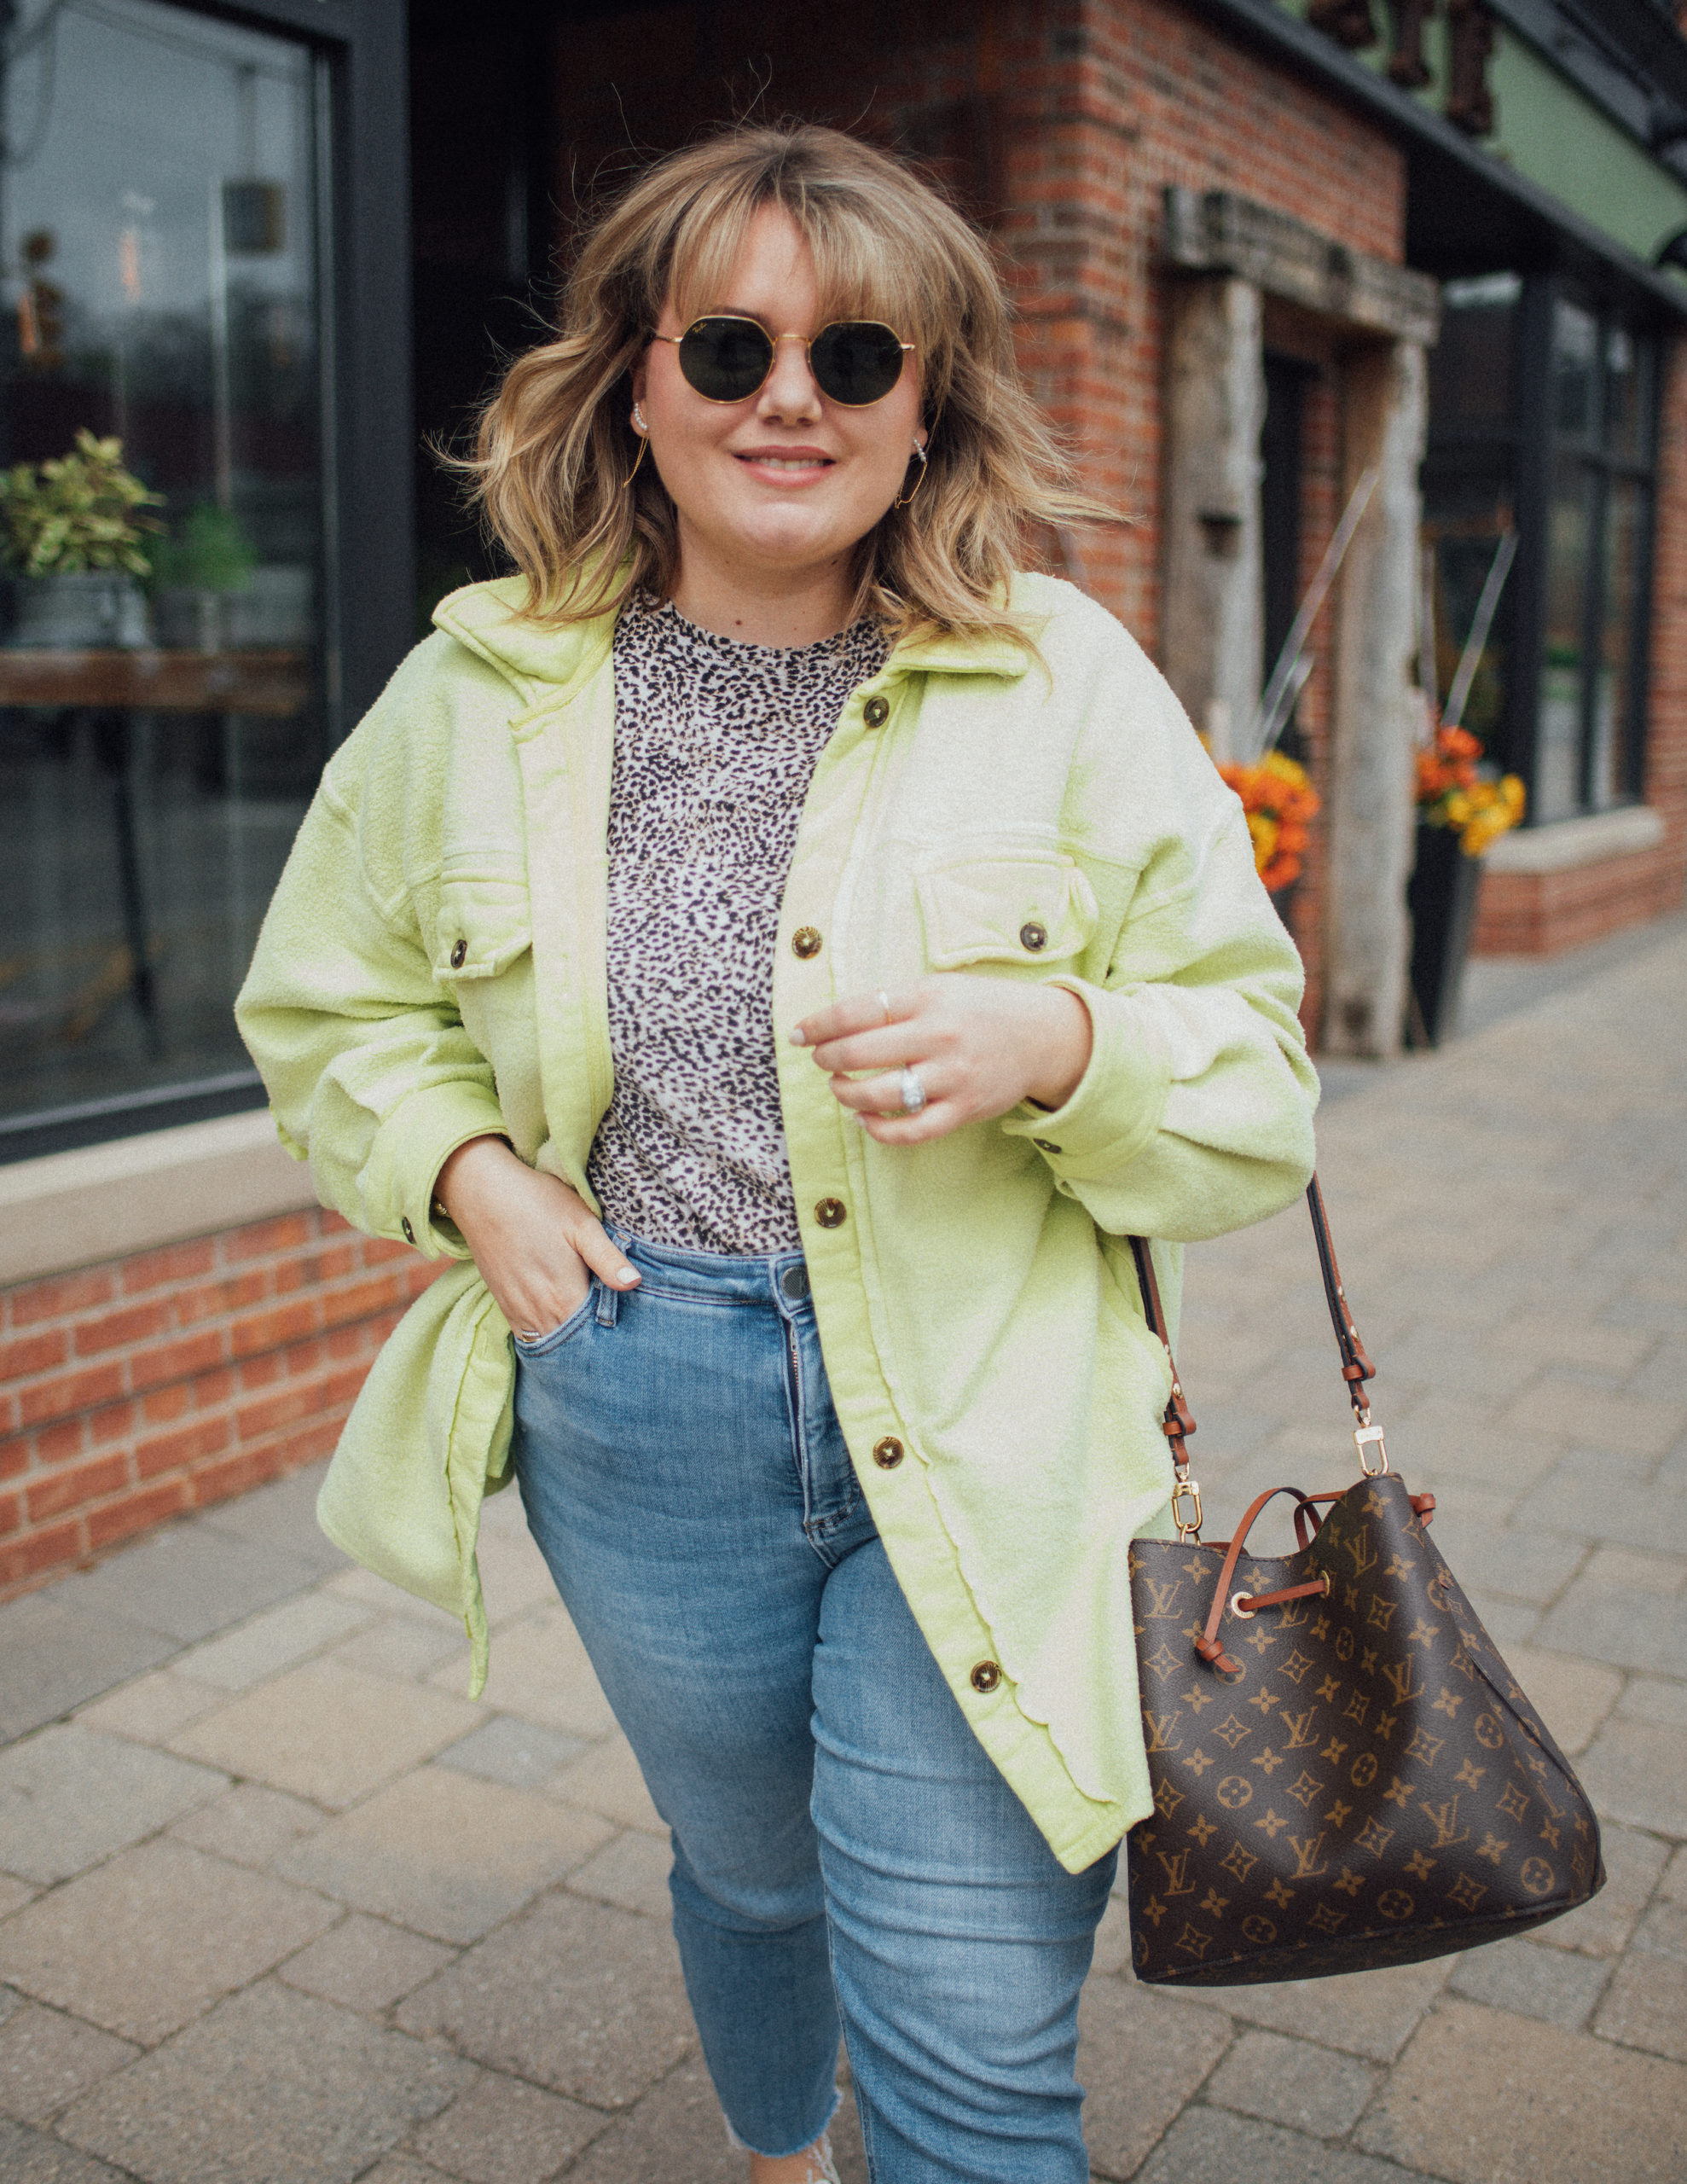 Sharing the Free People Ruby Jacket with a spring outfit. I am a size 16 and wear an L in the Free People Ruby Jacket.